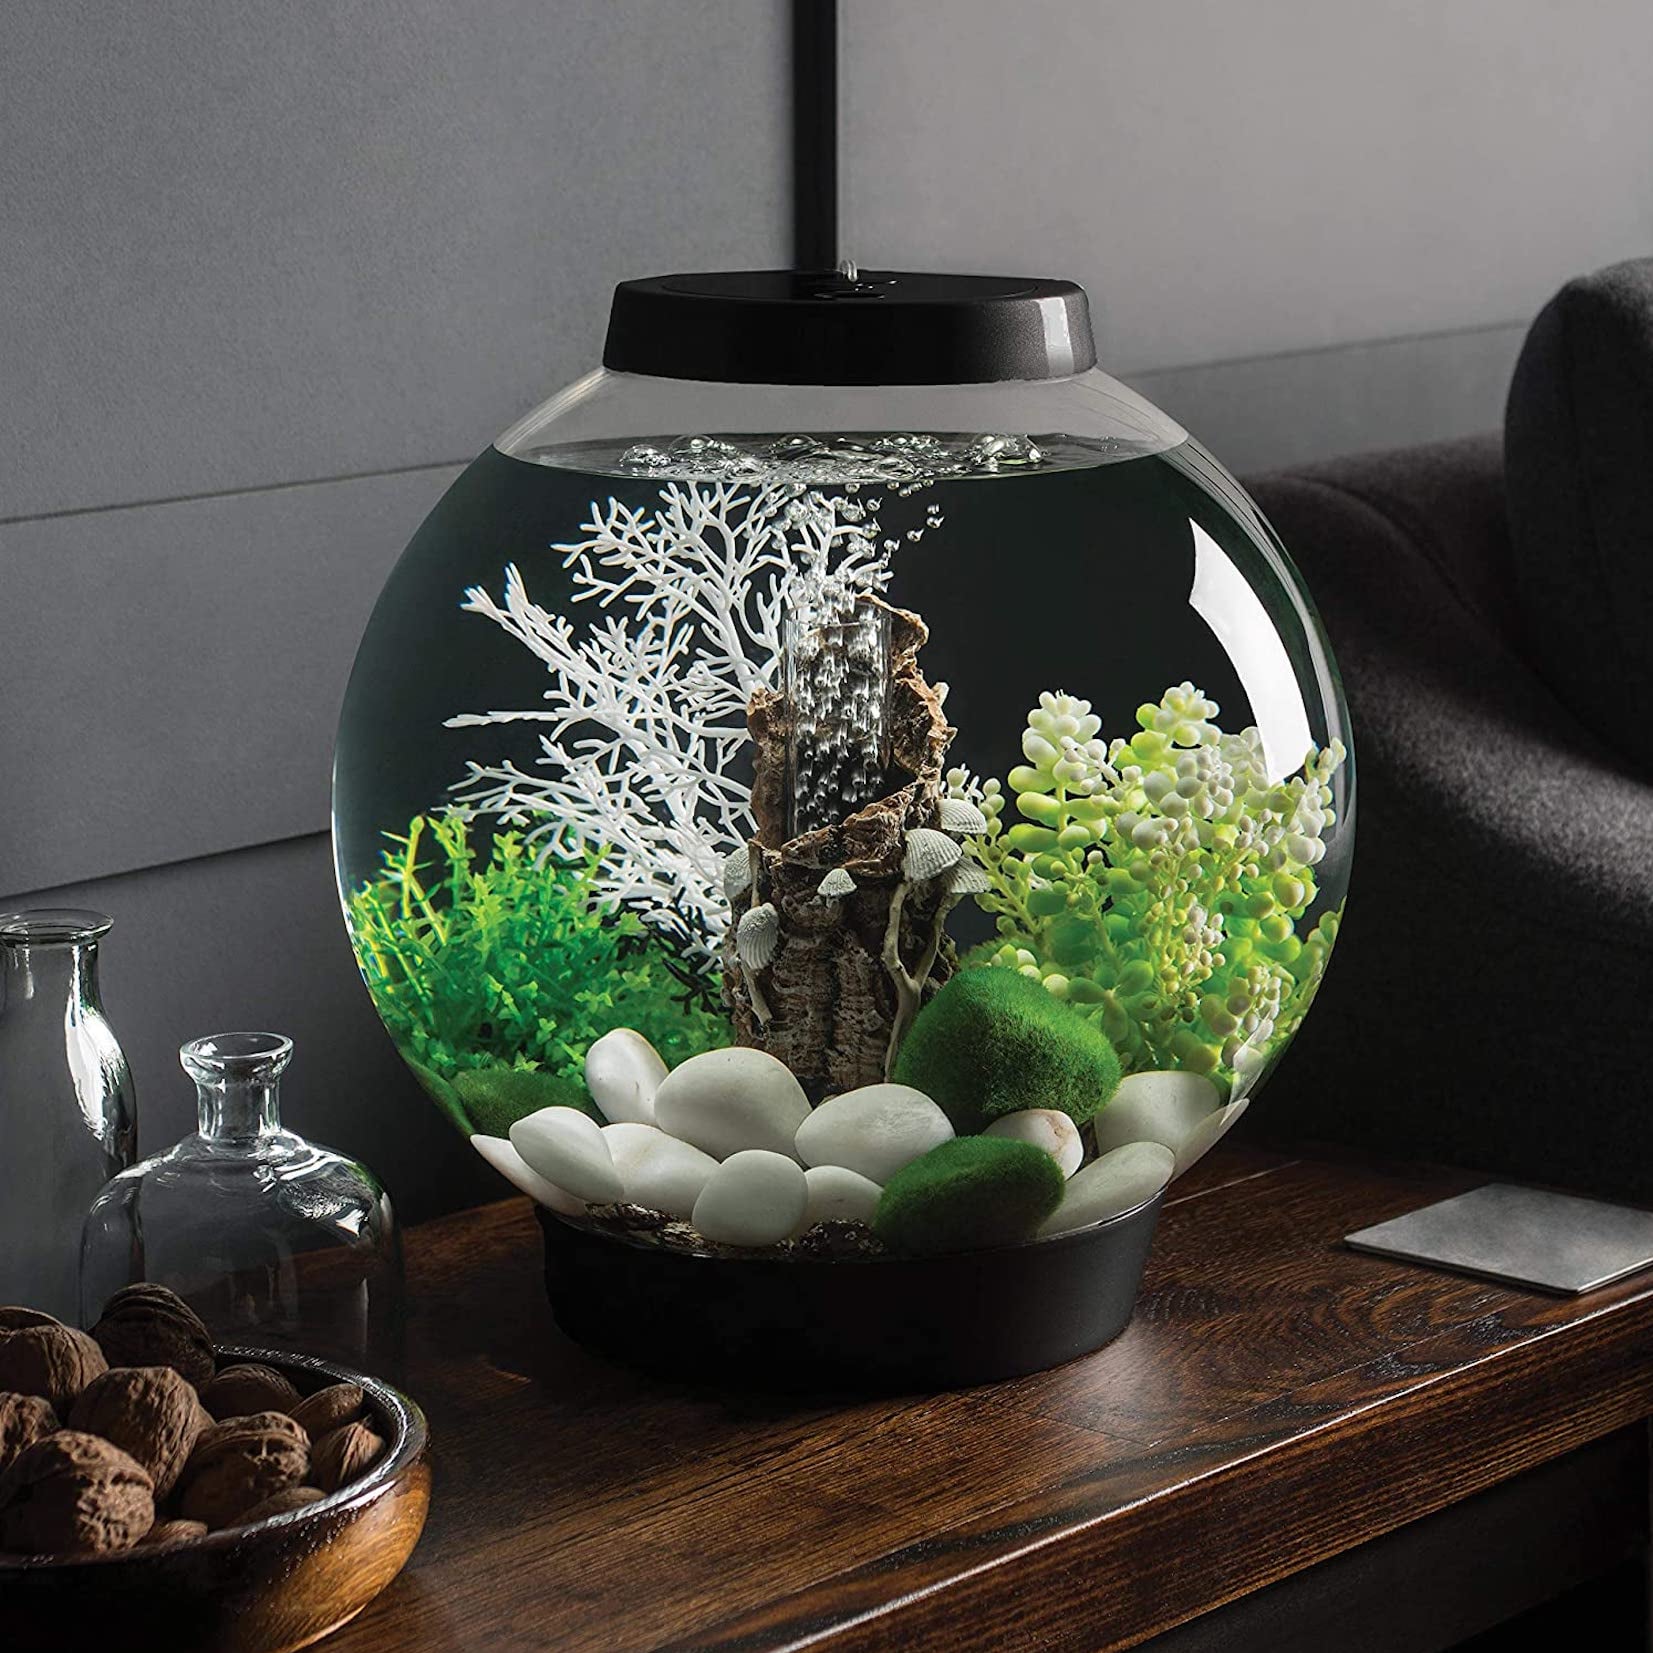 Thee 20 Best Fish Tanks for Beginners